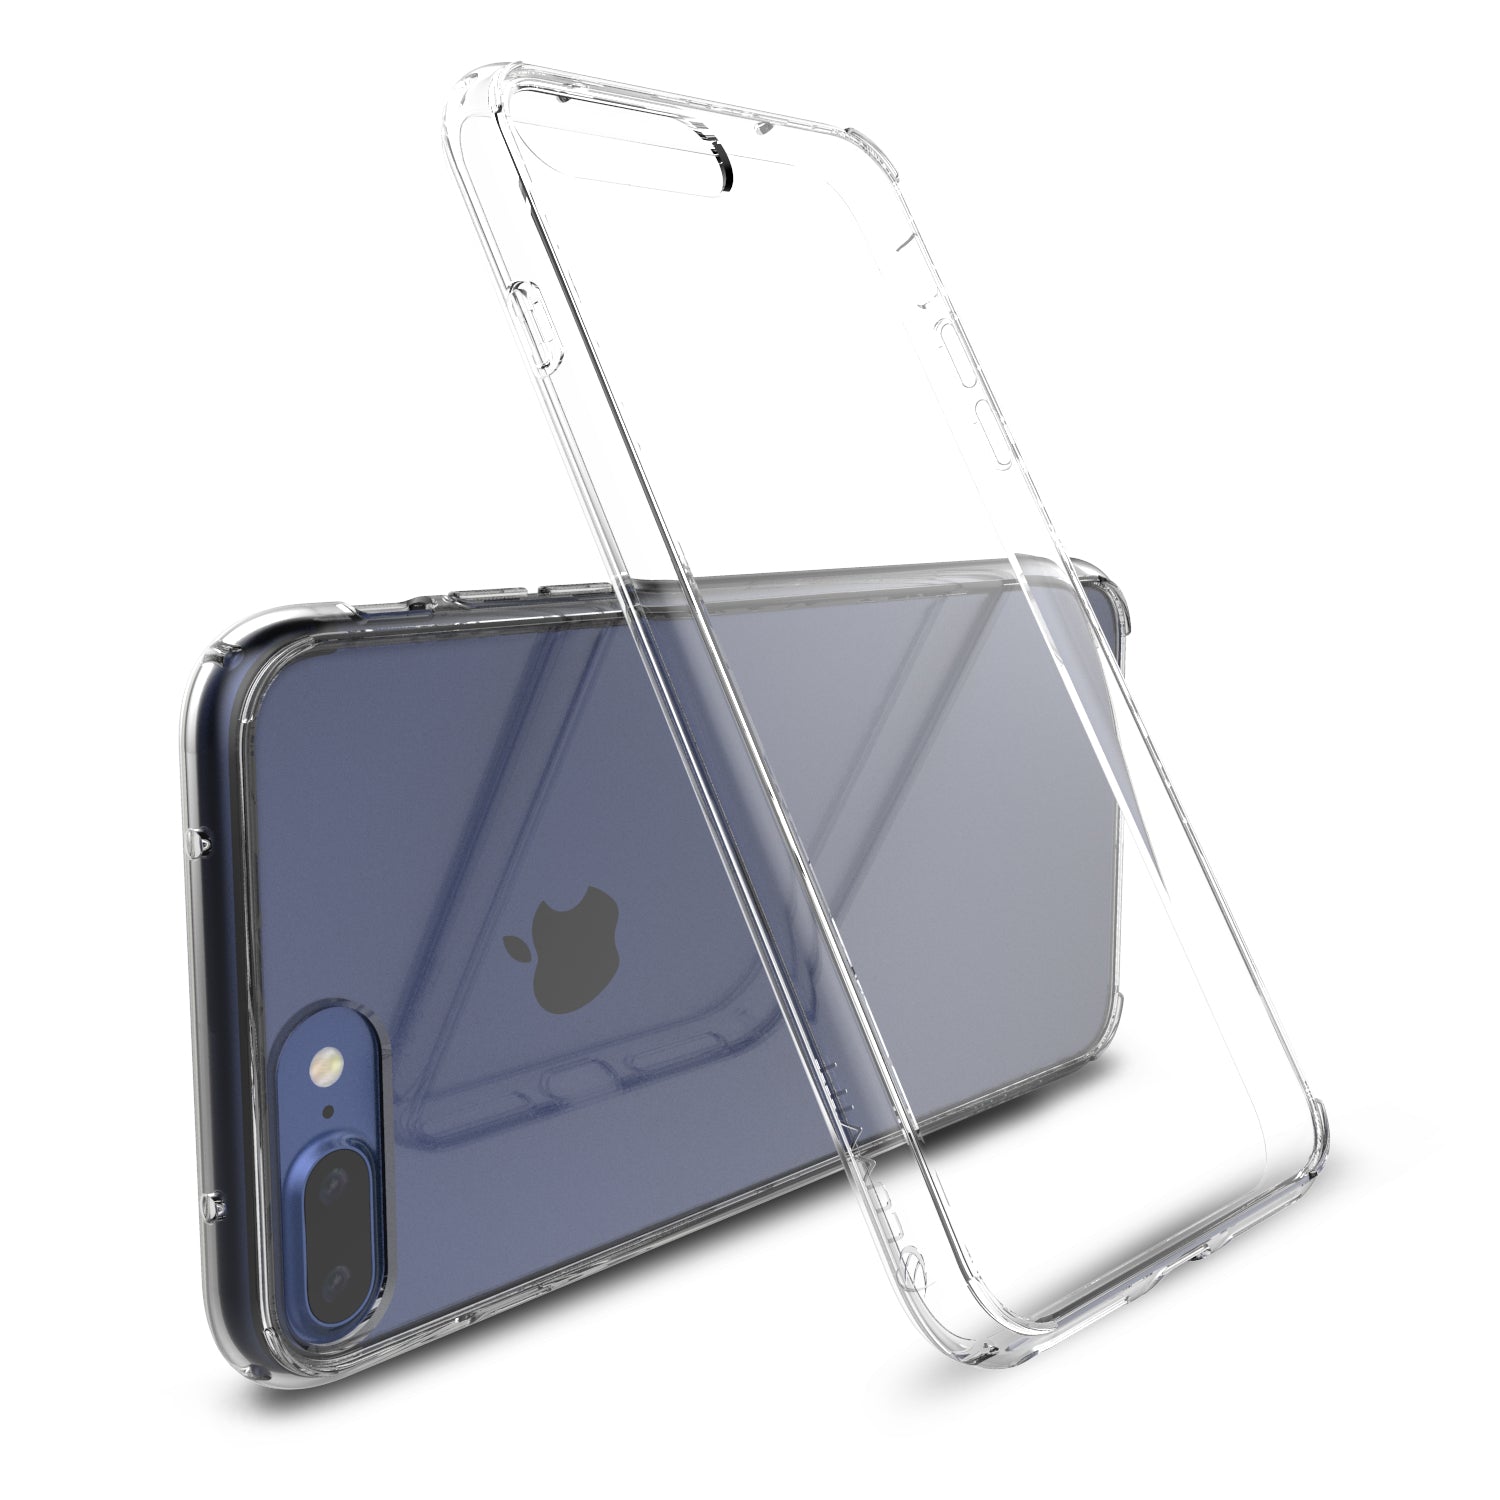 Luvvitt Clear View Hybrid Case for iPhone 8 Plus - Crystal Clear